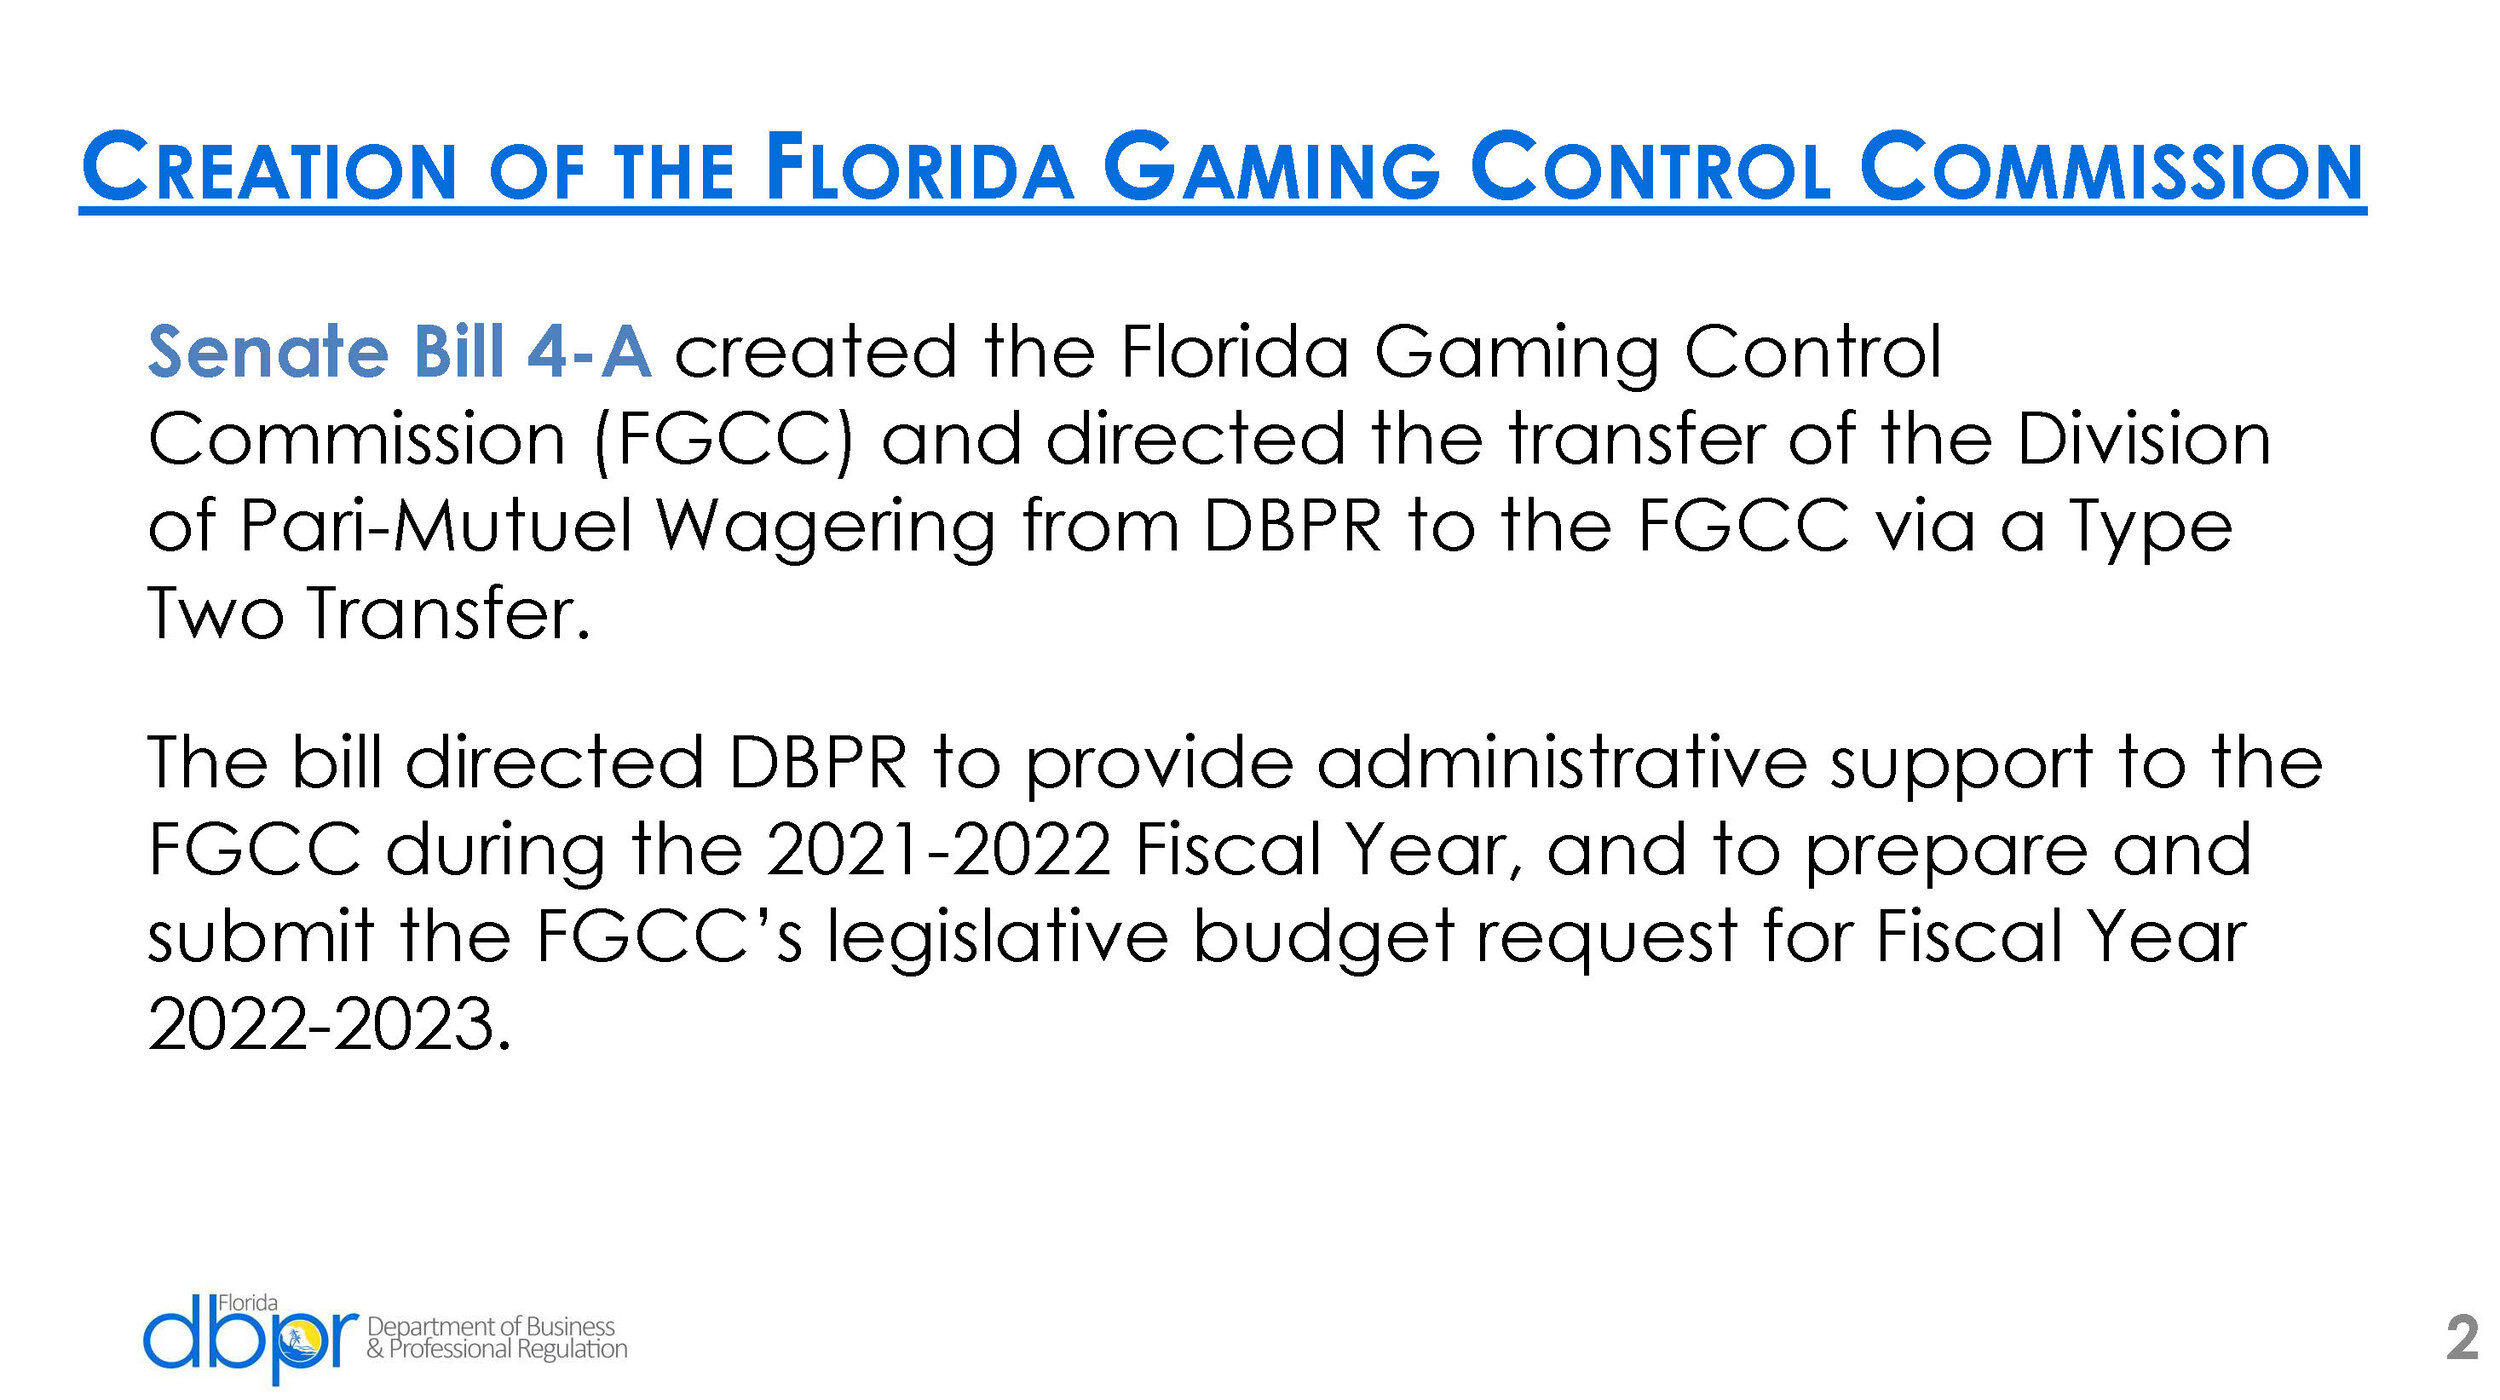 Florida Gaming Control Commission LBR 22-23_Page_02.jpg